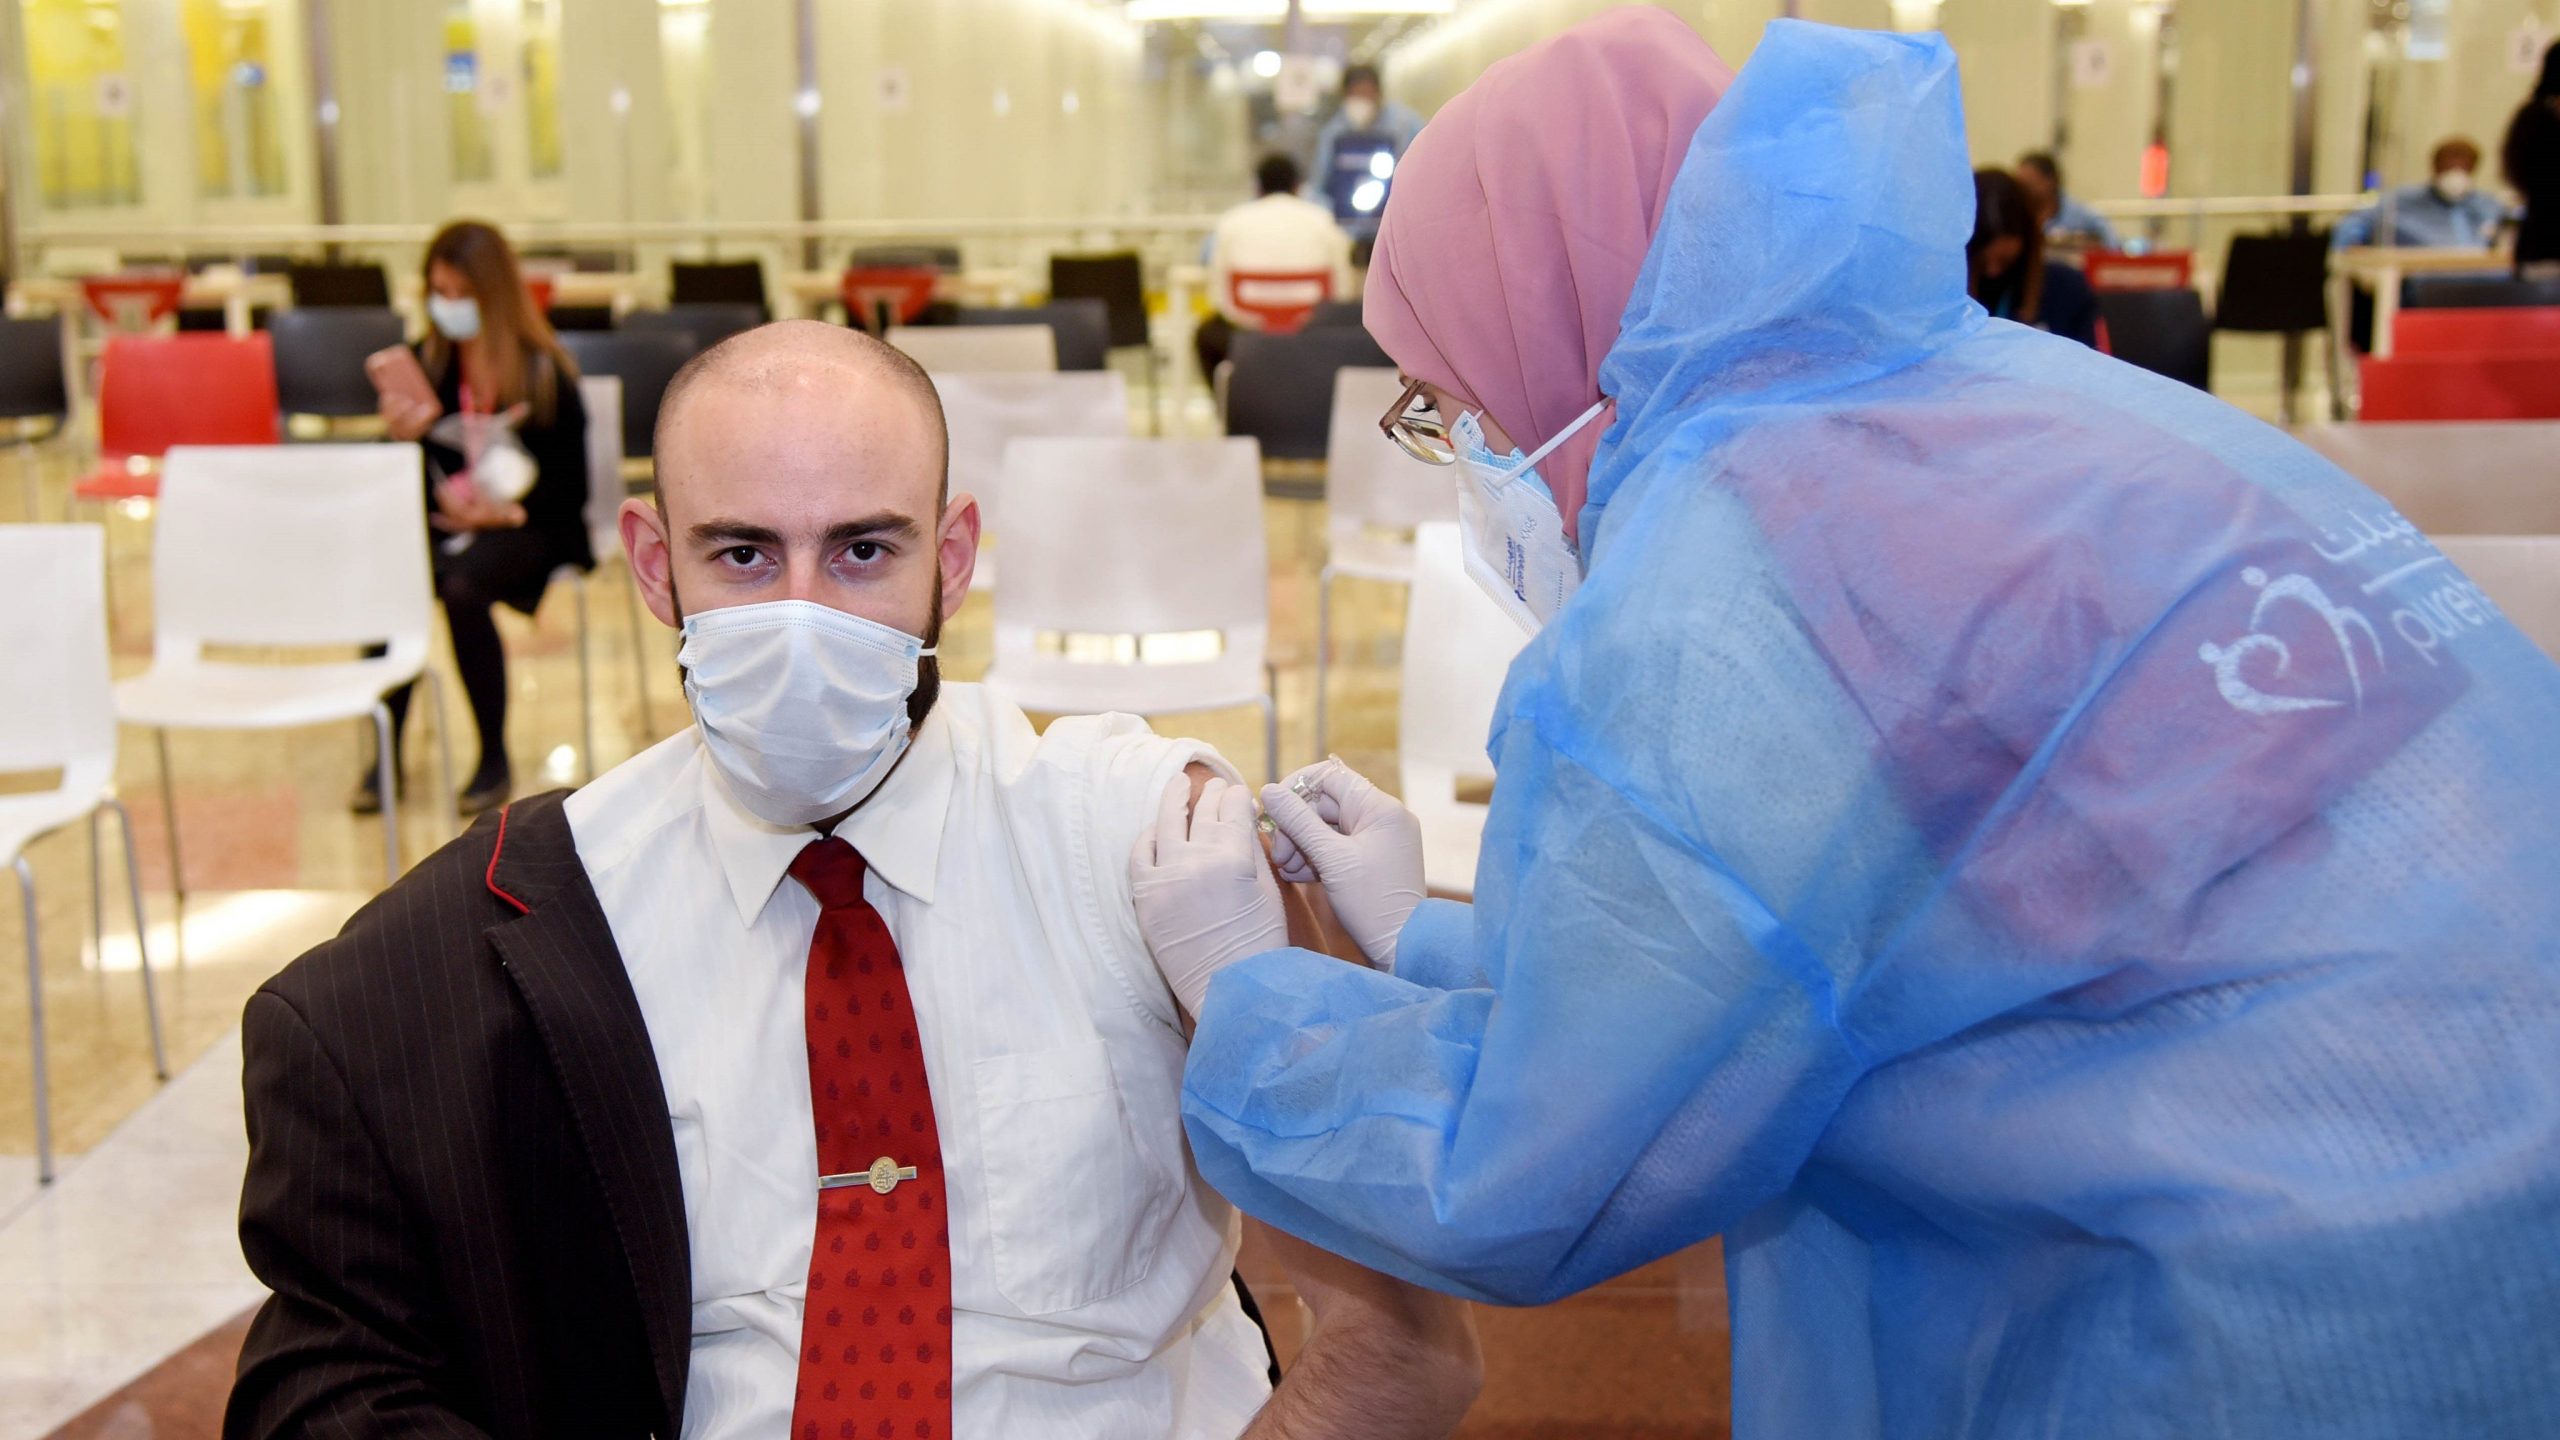 Emirates airline launches COVID-19 vaccination drive for staff